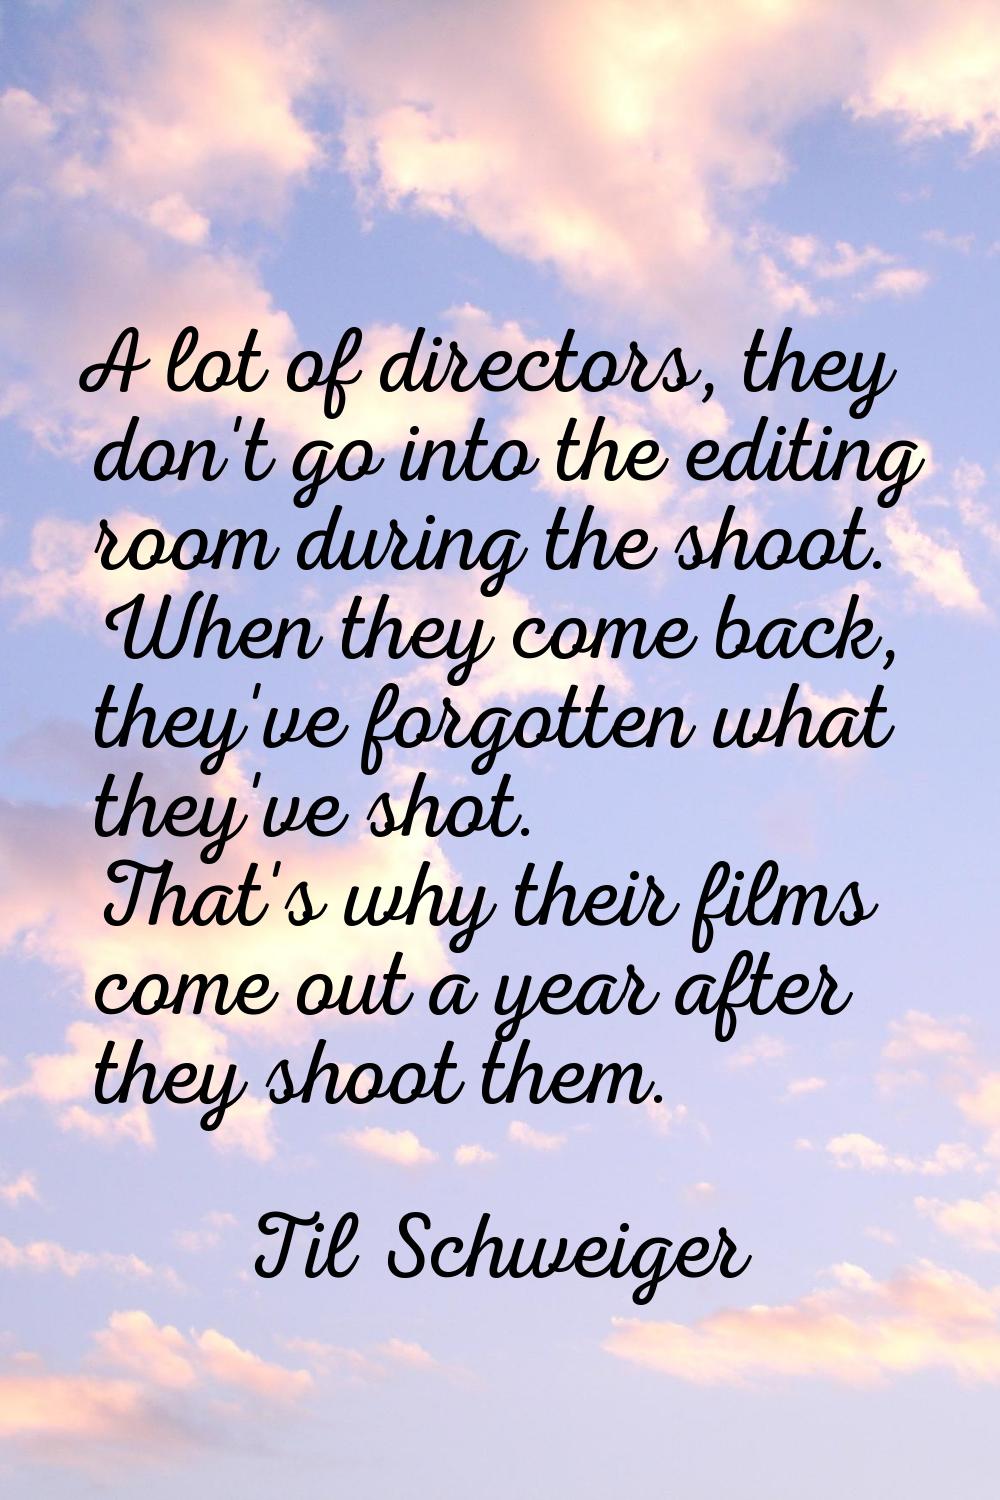 A lot of directors, they don't go into the editing room during the shoot. When they come back, they